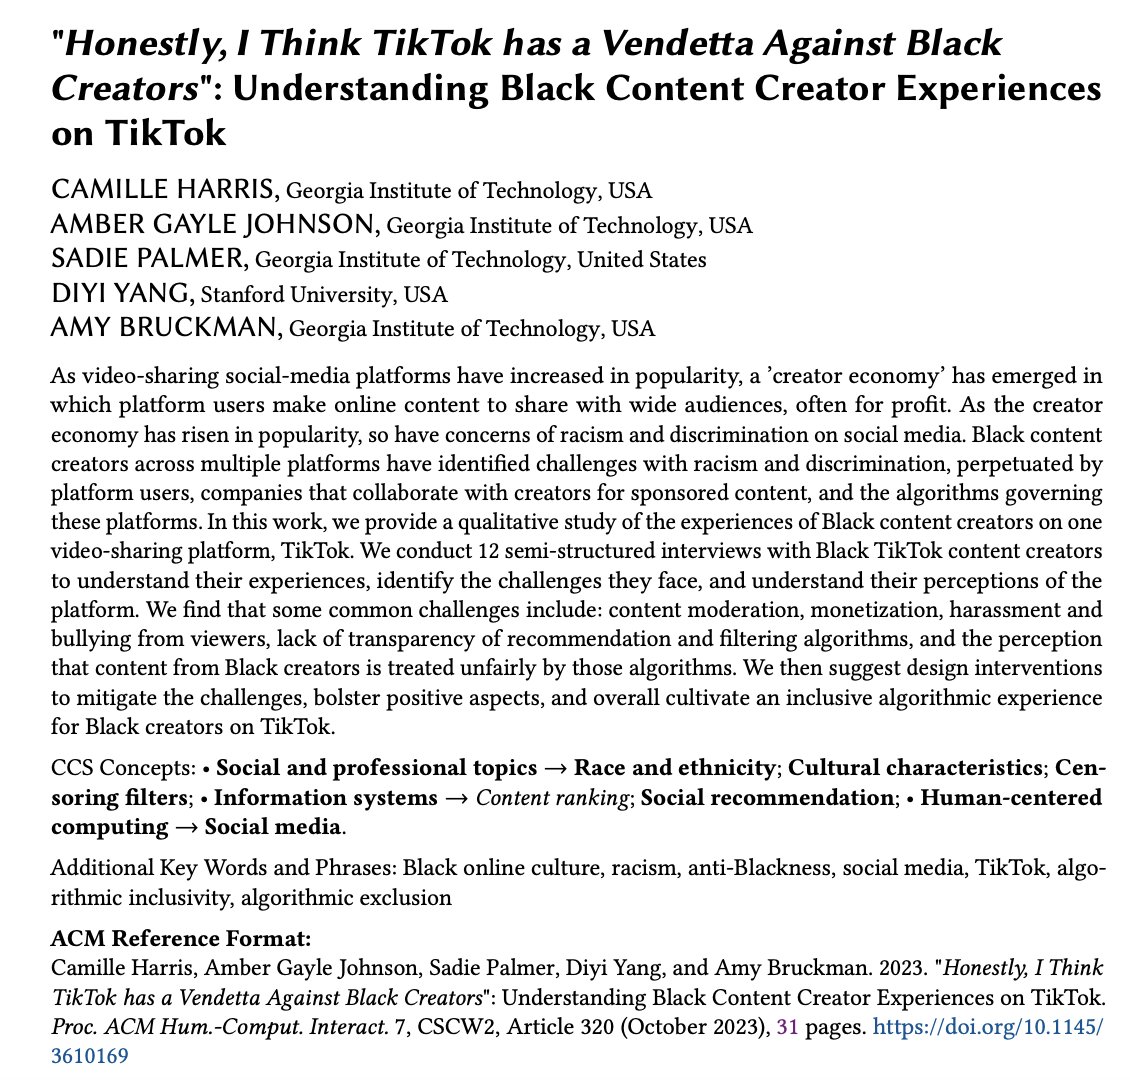 I'm thrilled to share that our #CSCW2023 paper has been awarded Recognition for Contribution to Diversity and Inclusion 🥳! Our work explores the experiences and challenges of Black TikTok creators and affordances that support inclusive online platforms: dl.acm.org/doi/10.1145/36…